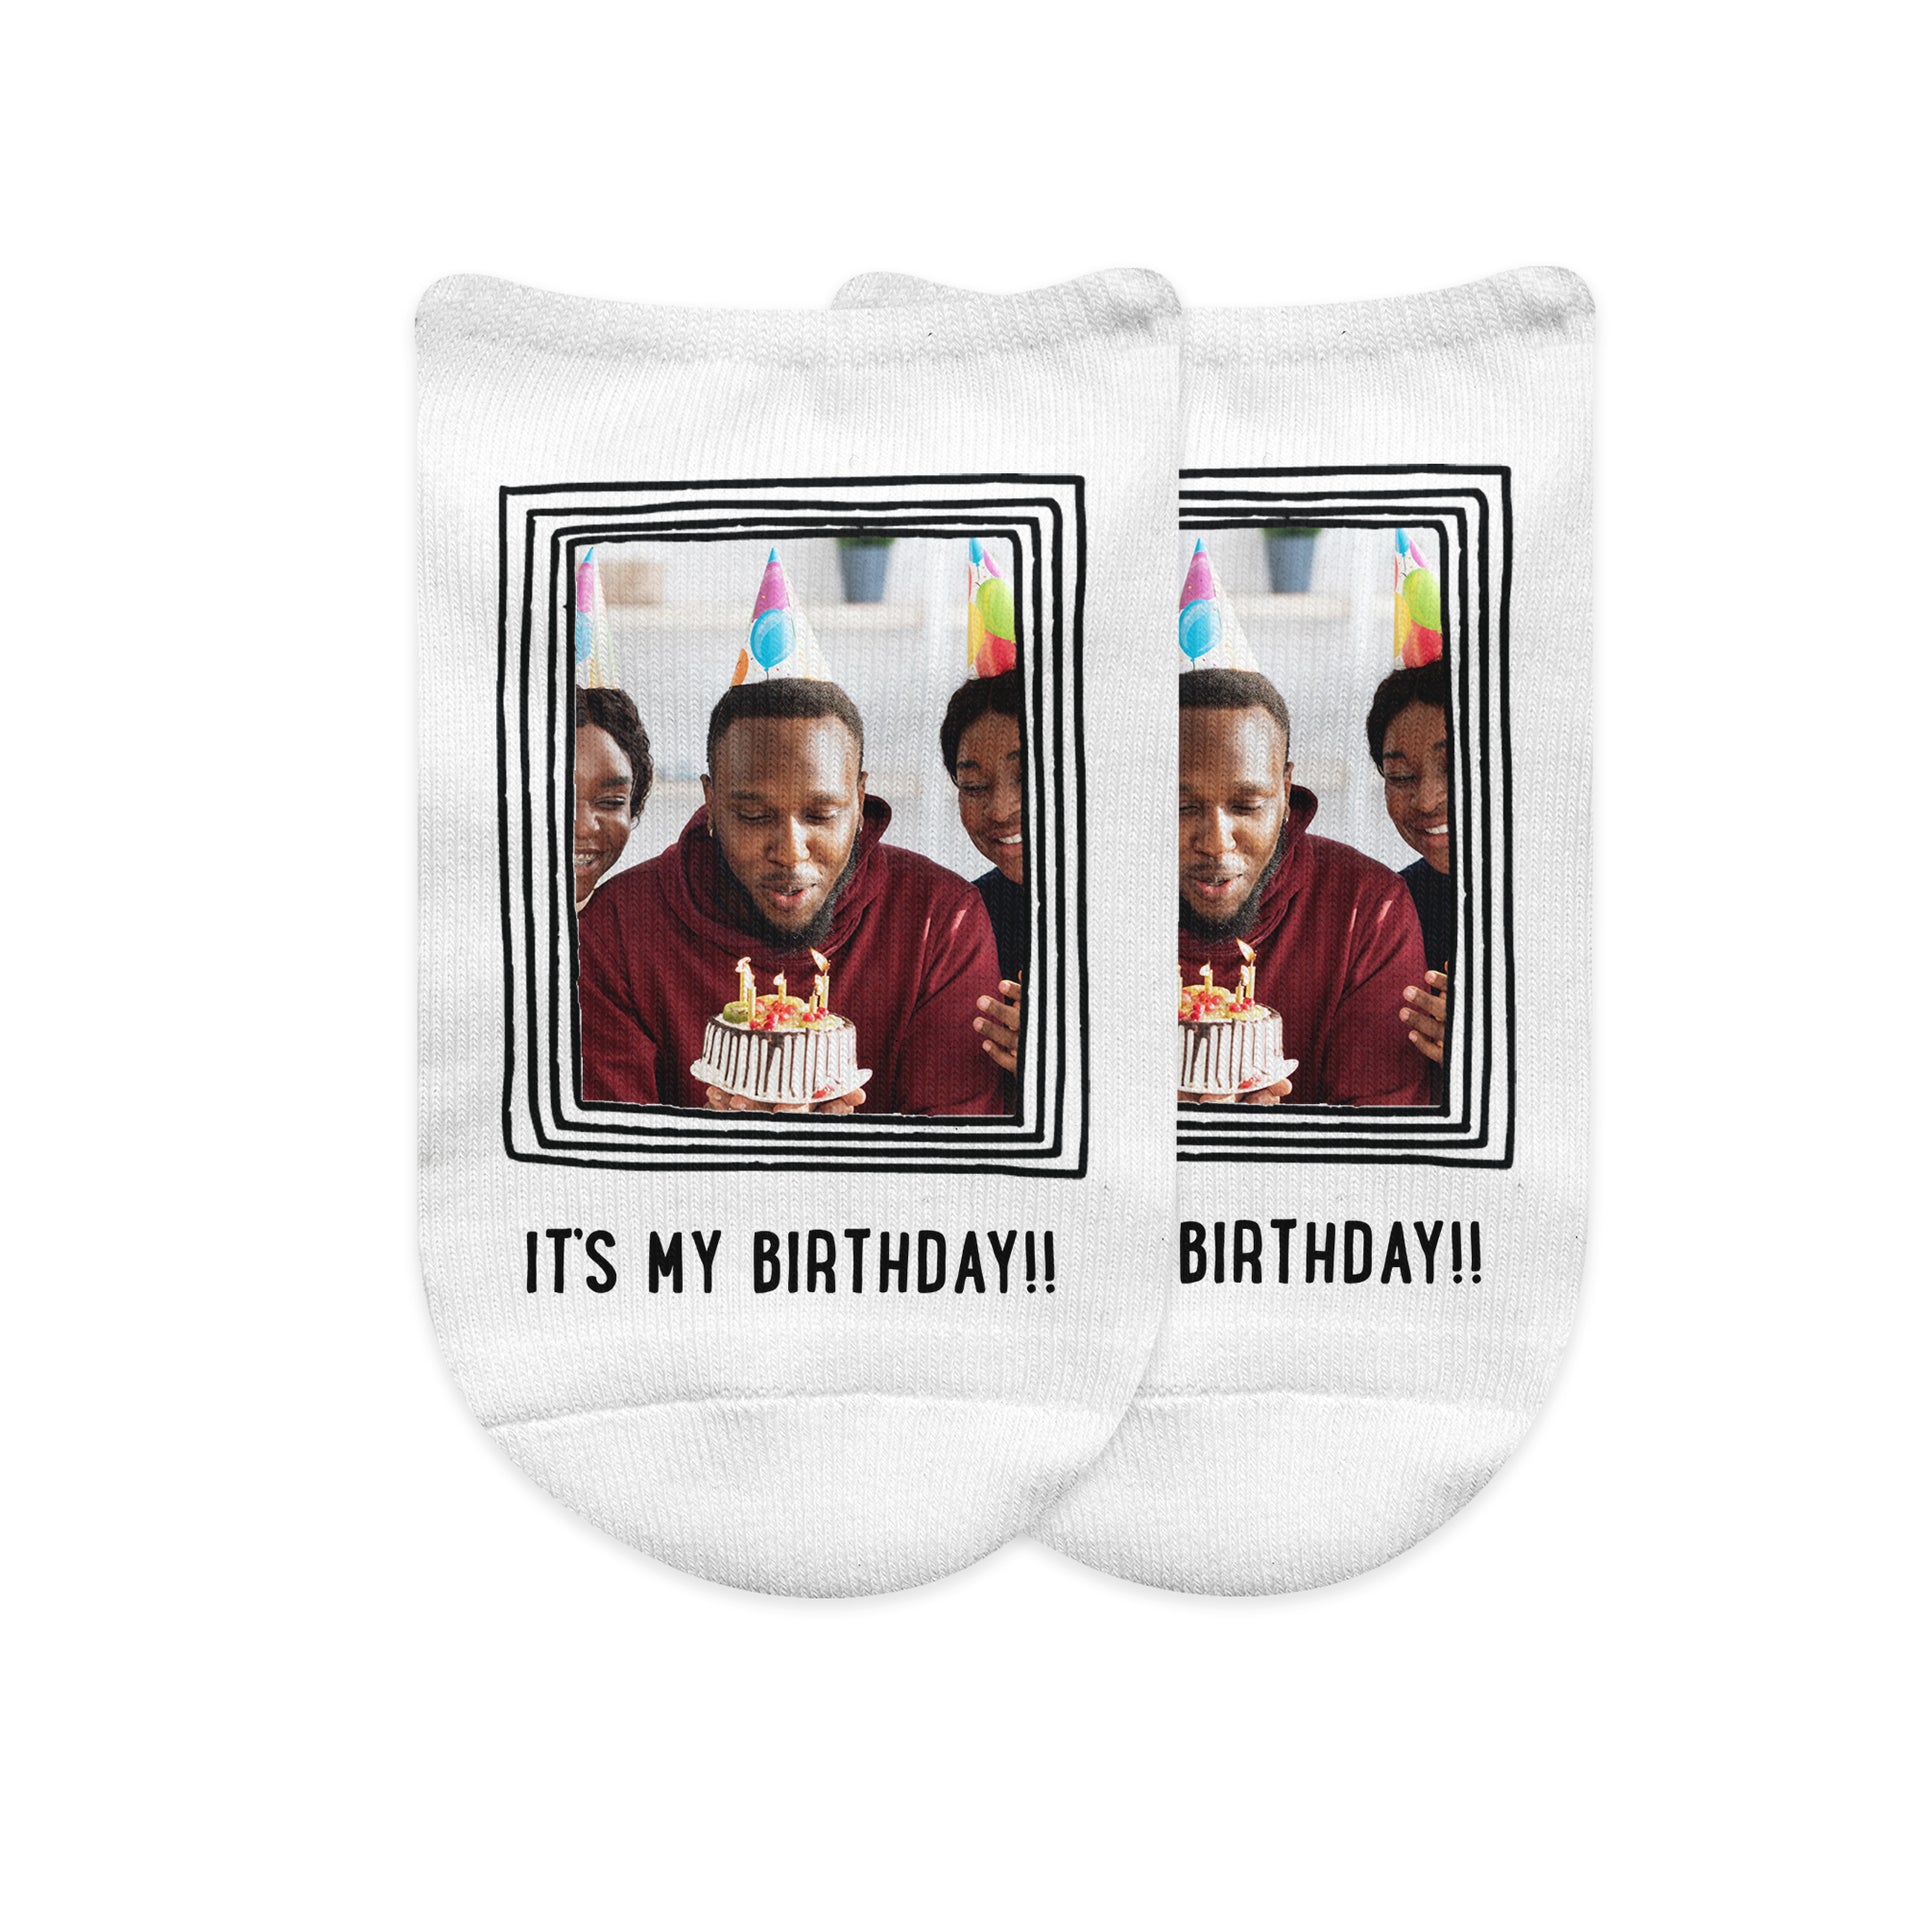 Custom printed comfy white cotton no show socks with your framed doodle design and your own photo and text printed on the top of the socks.